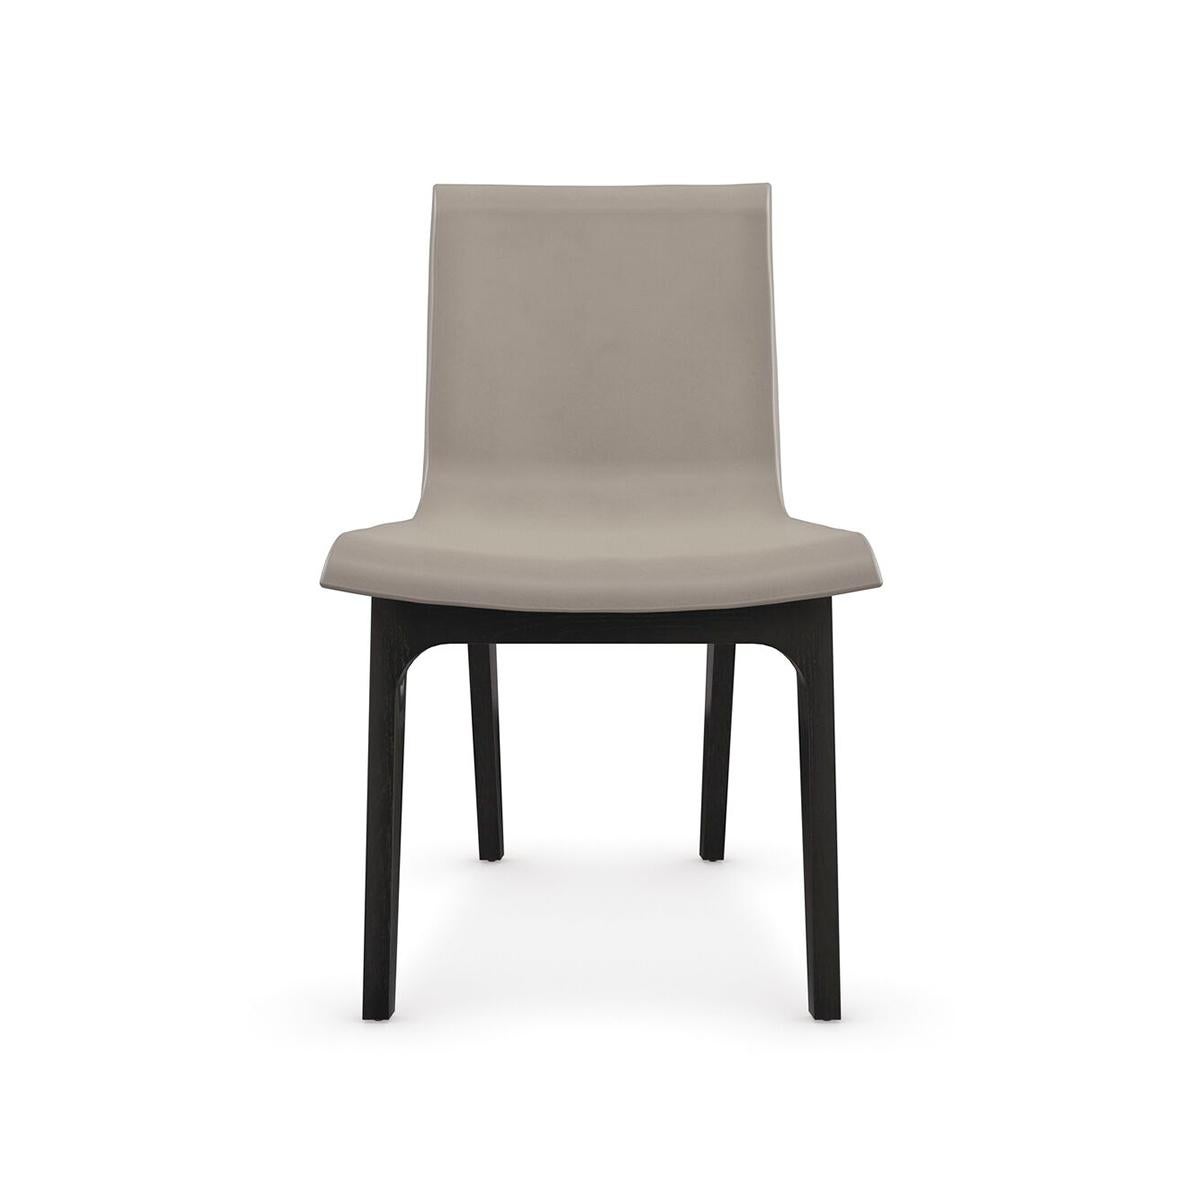 A masterful blend of luxury and comfort, the dining chair introduces a simple yet elegant mix of textures and materials. Comfortably curved, the seamless back and seat are dressed in taupe leather, contrasted by wood legs in a dark Basalt finish. A